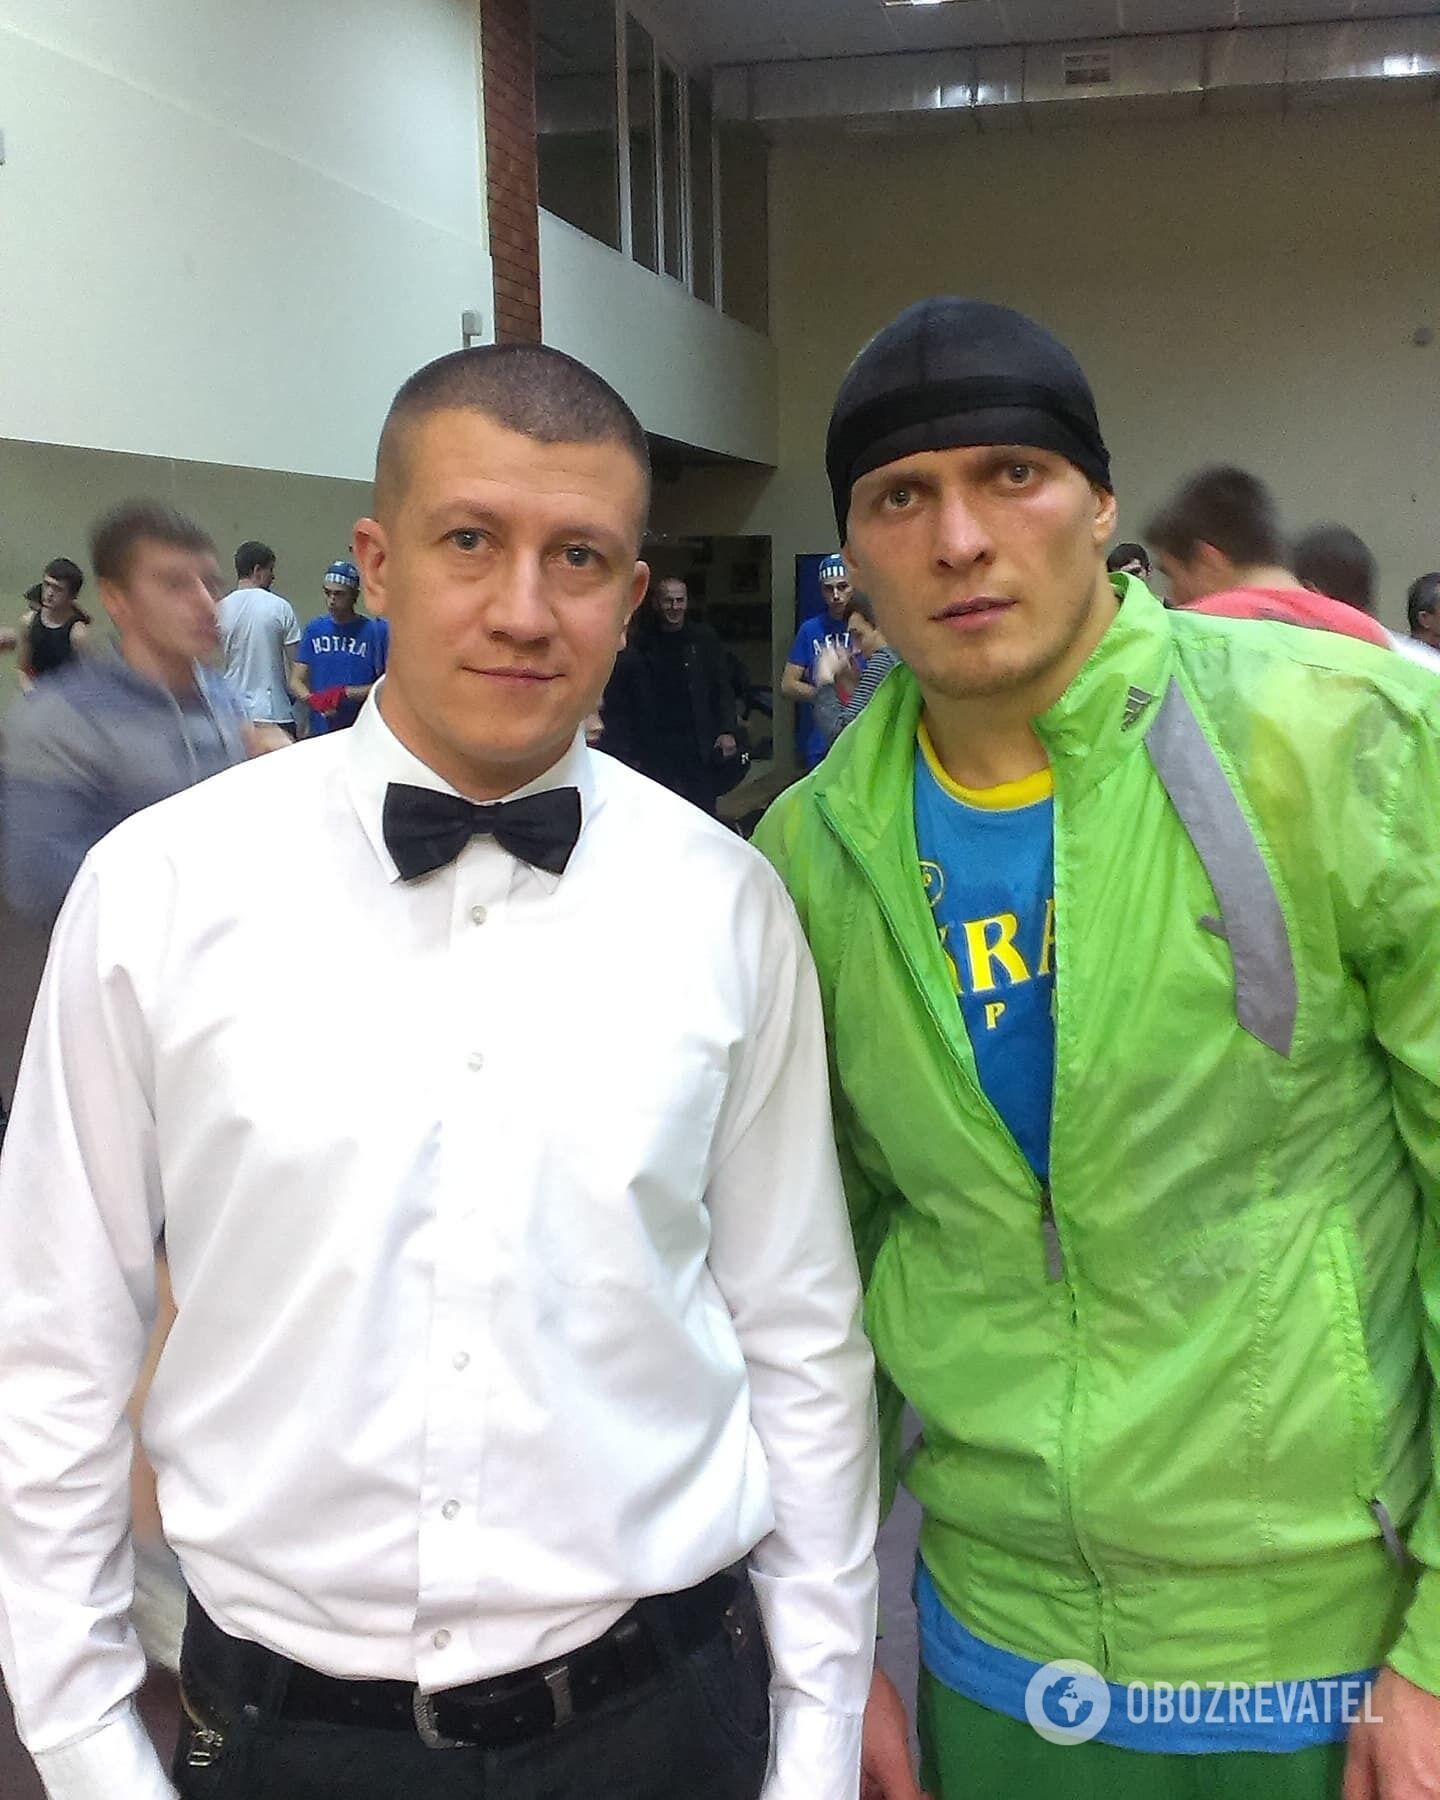 Died at the front. The boxing community of Ukraine suffered a heavy loss